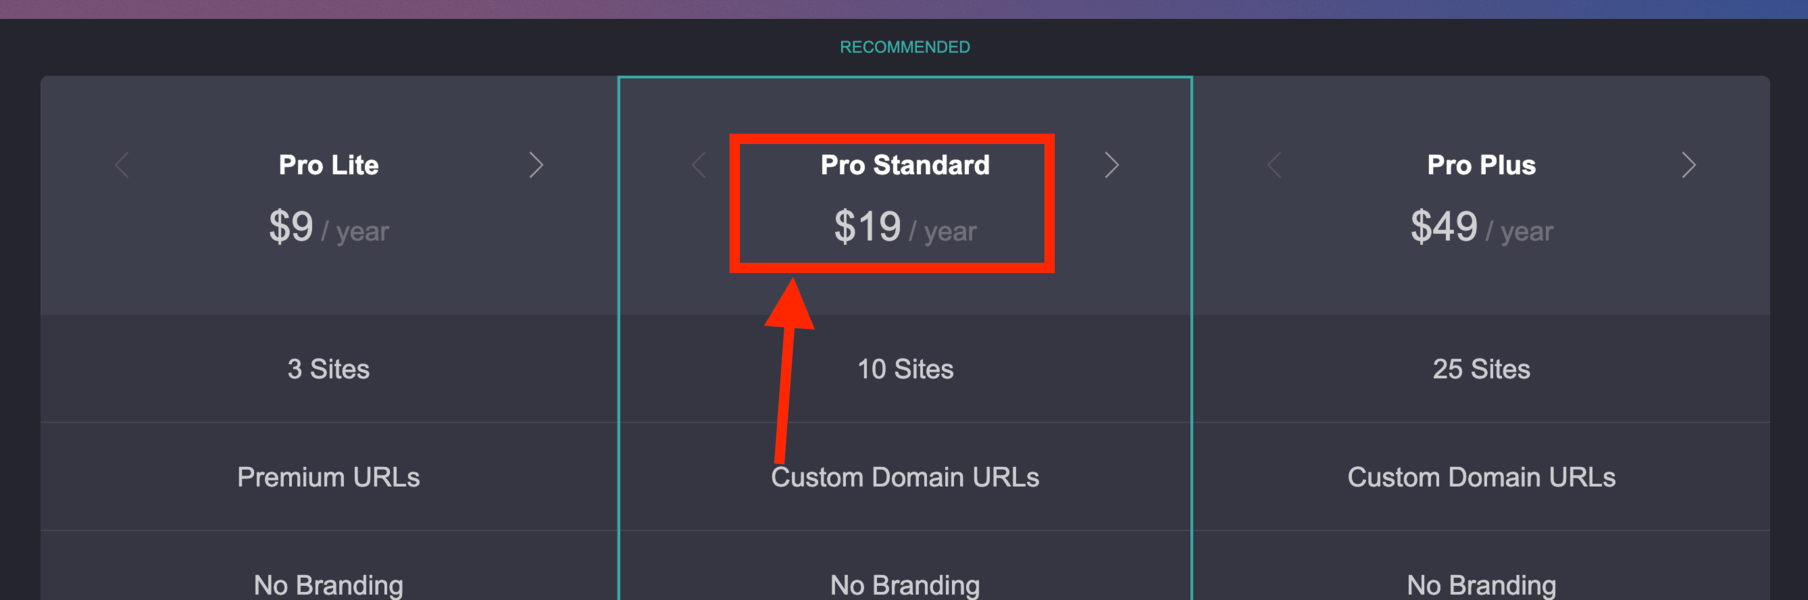 Showing that the Pro Standard Version allows for Custom Domain names